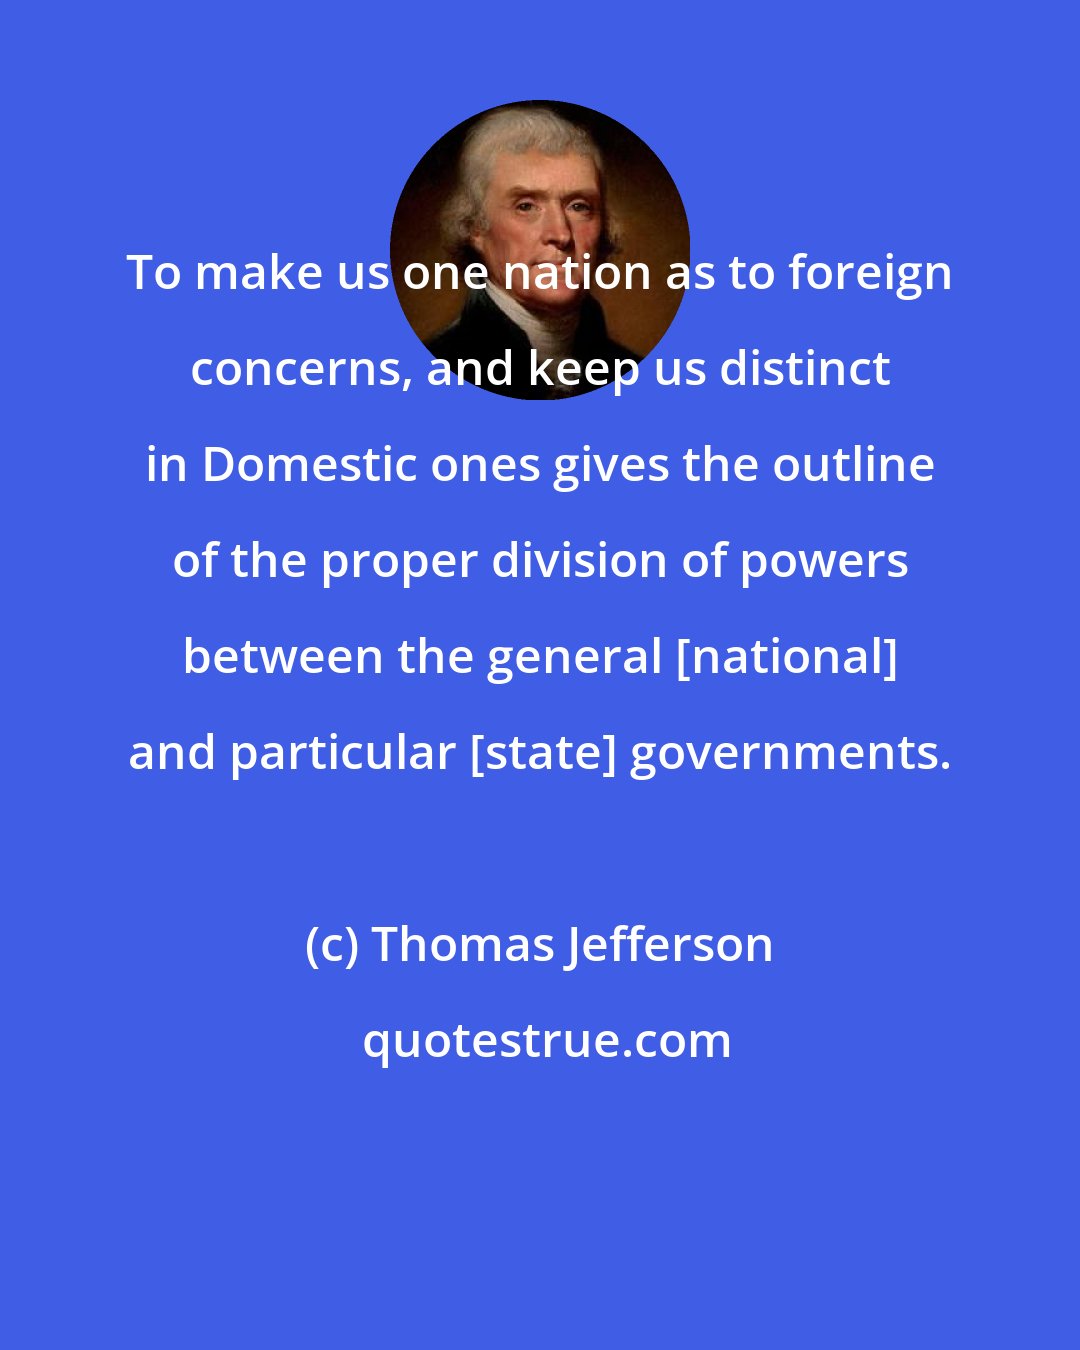 Thomas Jefferson: To make us one nation as to foreign concerns, and keep us distinct in Domestic ones gives the outline of the proper division of powers between the general [national] and particular [state] governments.